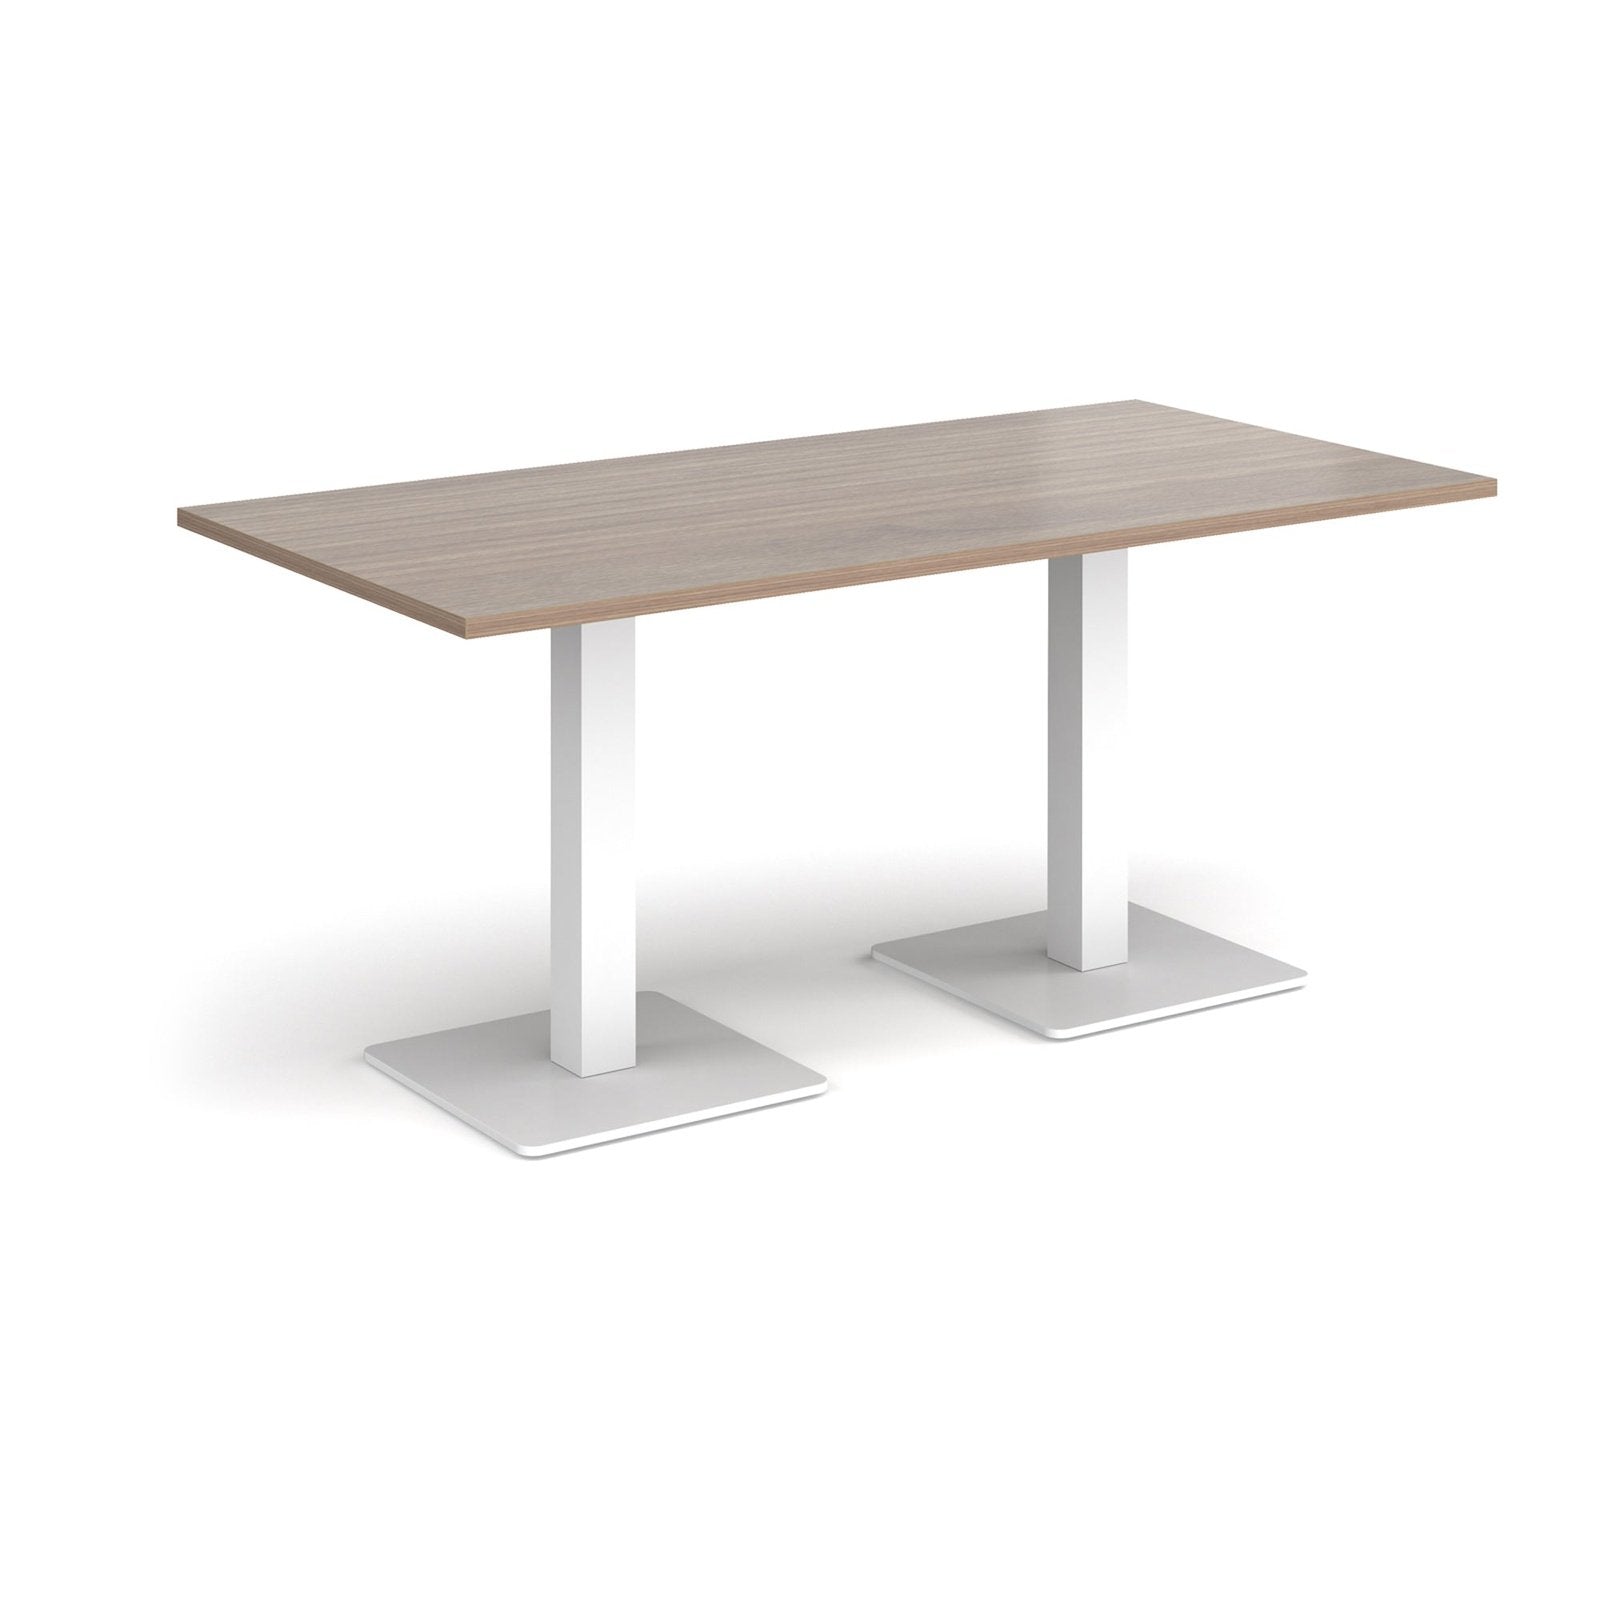 Brescia rectangular dining table - Office Products Online